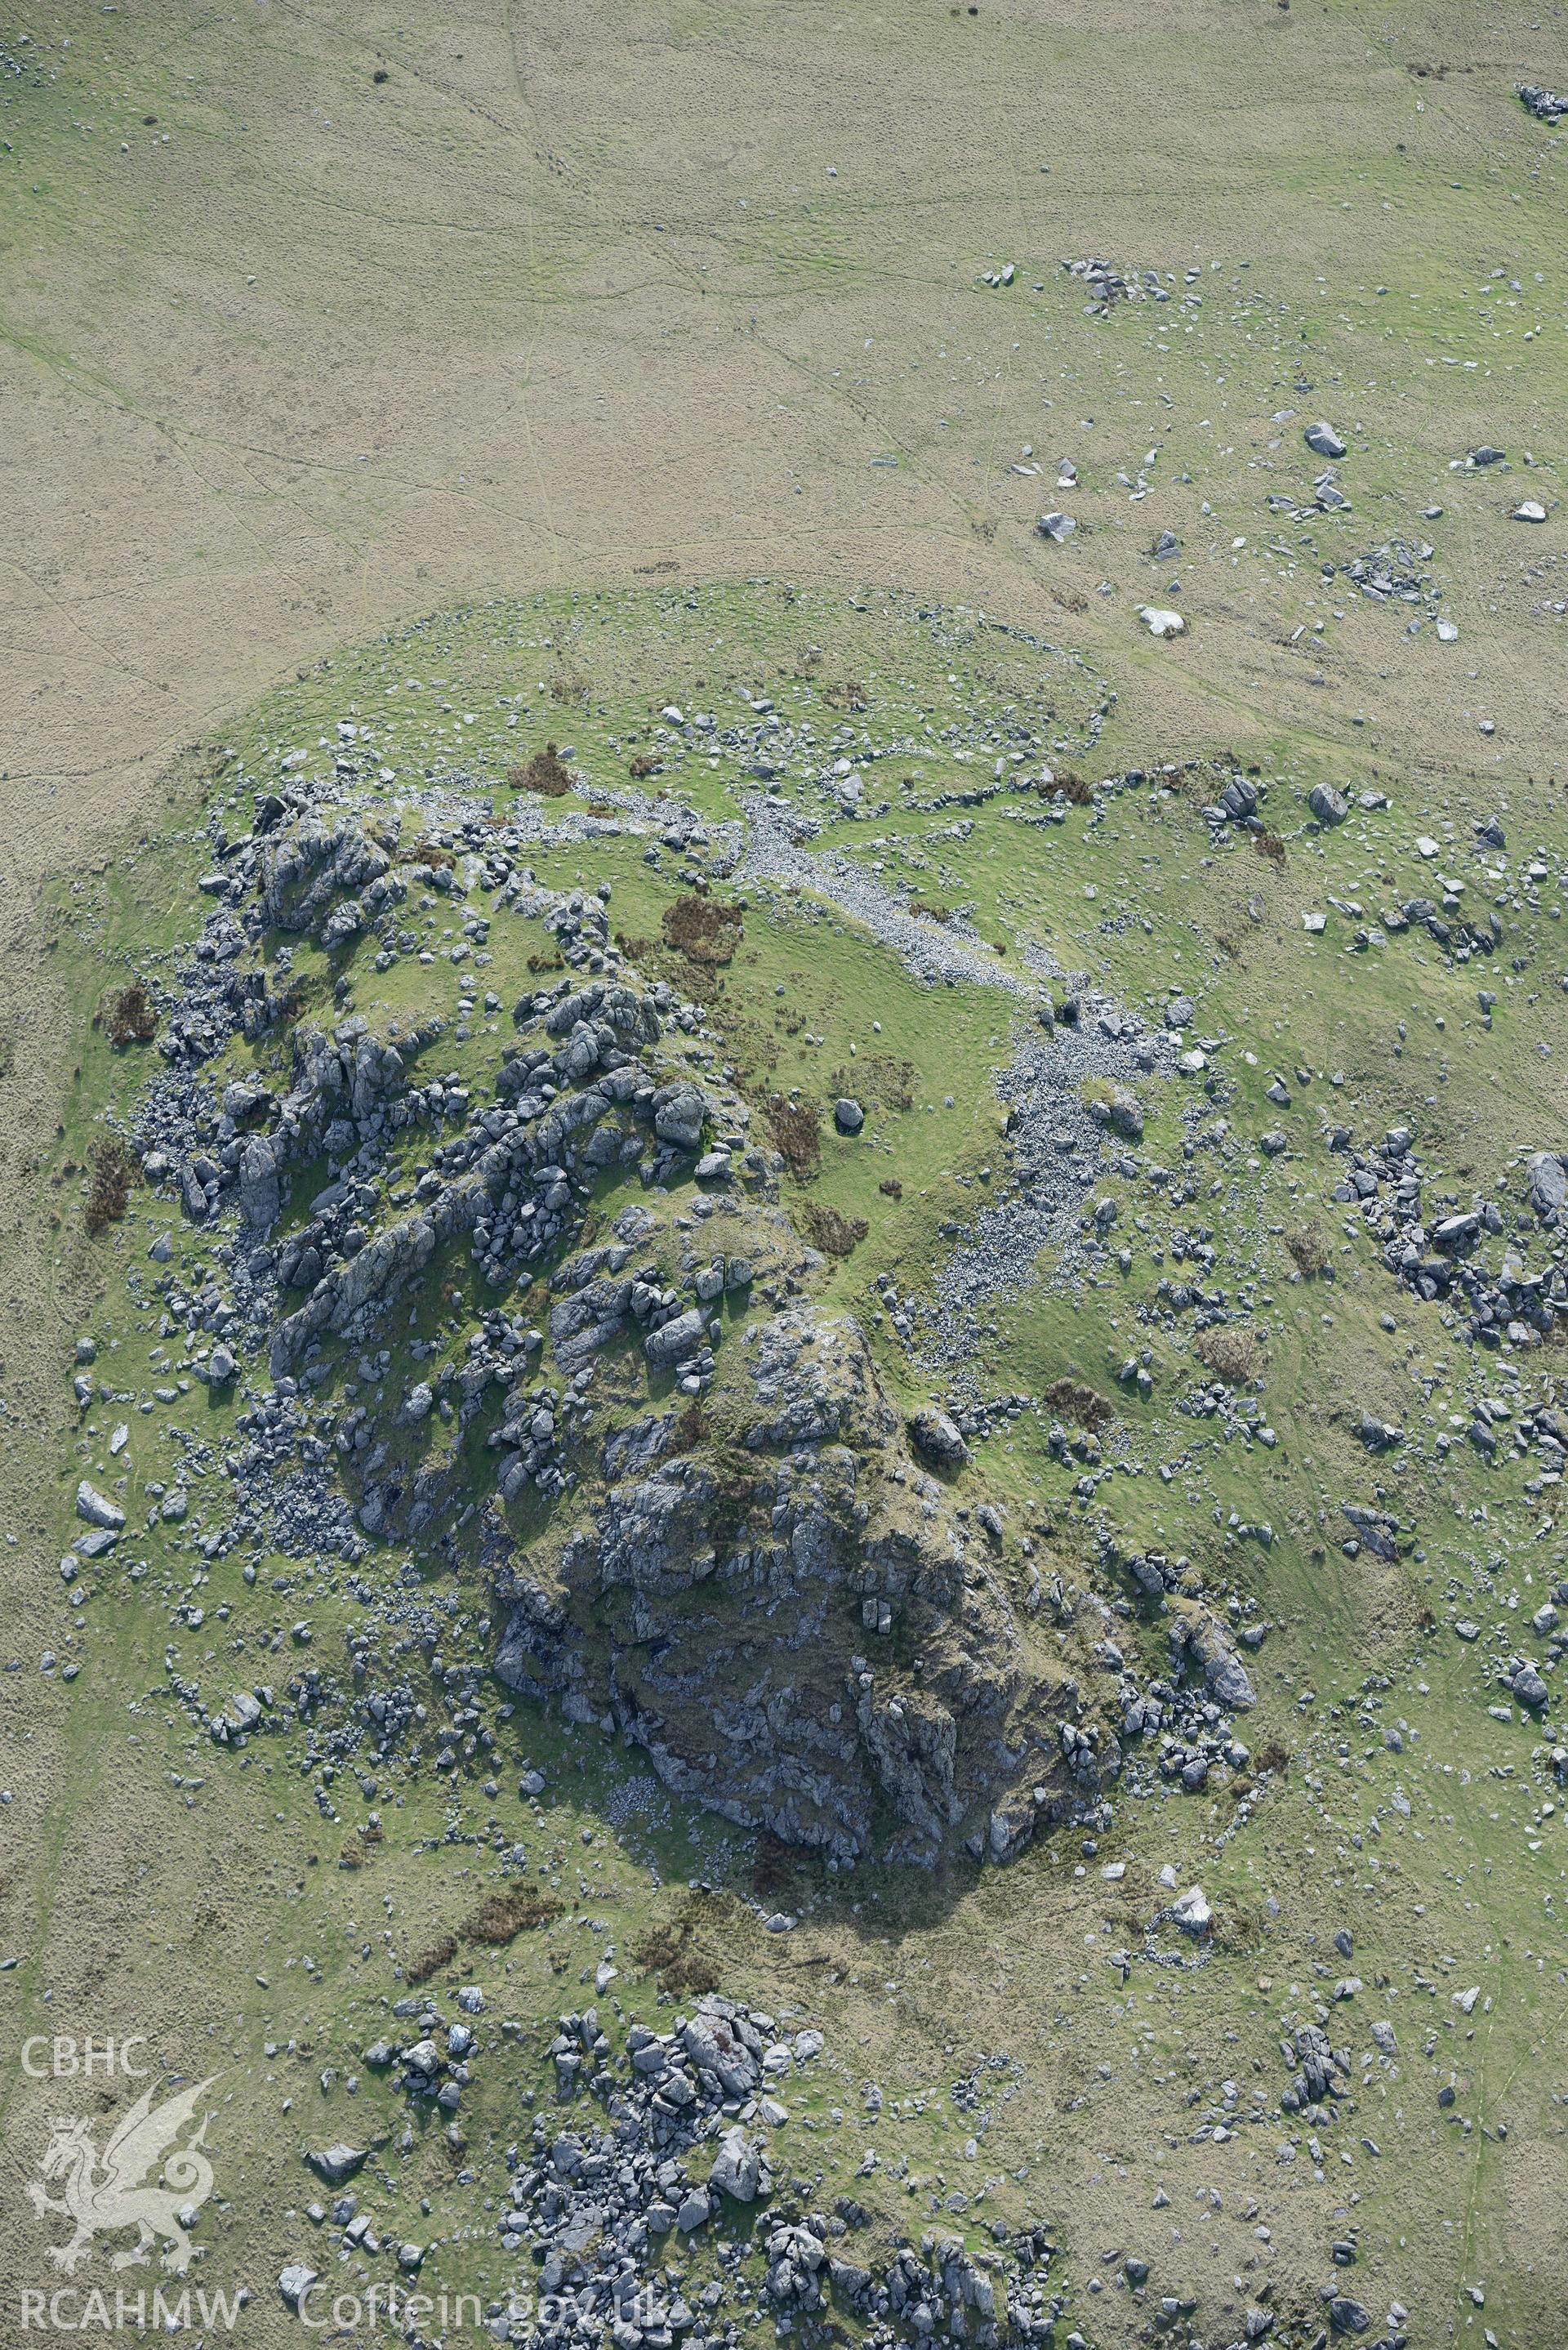 Carn Alw Hillfort. Oblique aerial photograph taken during the Royal Commission's programme of archaeological aerial reconnaissance by Toby Driver on 15th April 2015.'